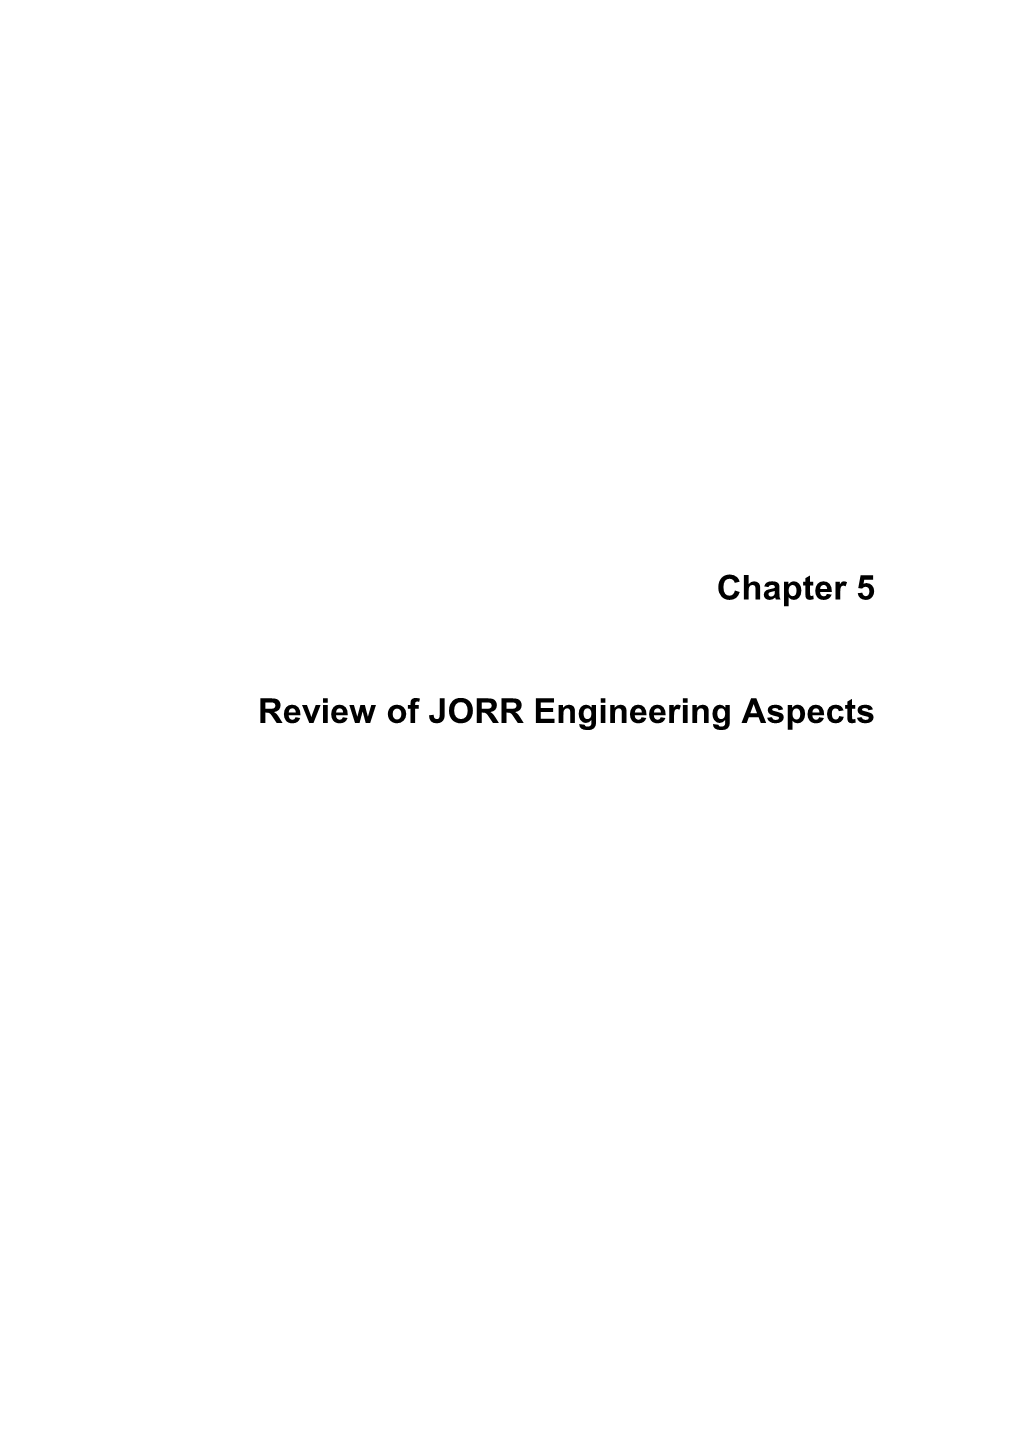 Chapter 5 Review of JORR Engineering Aspects